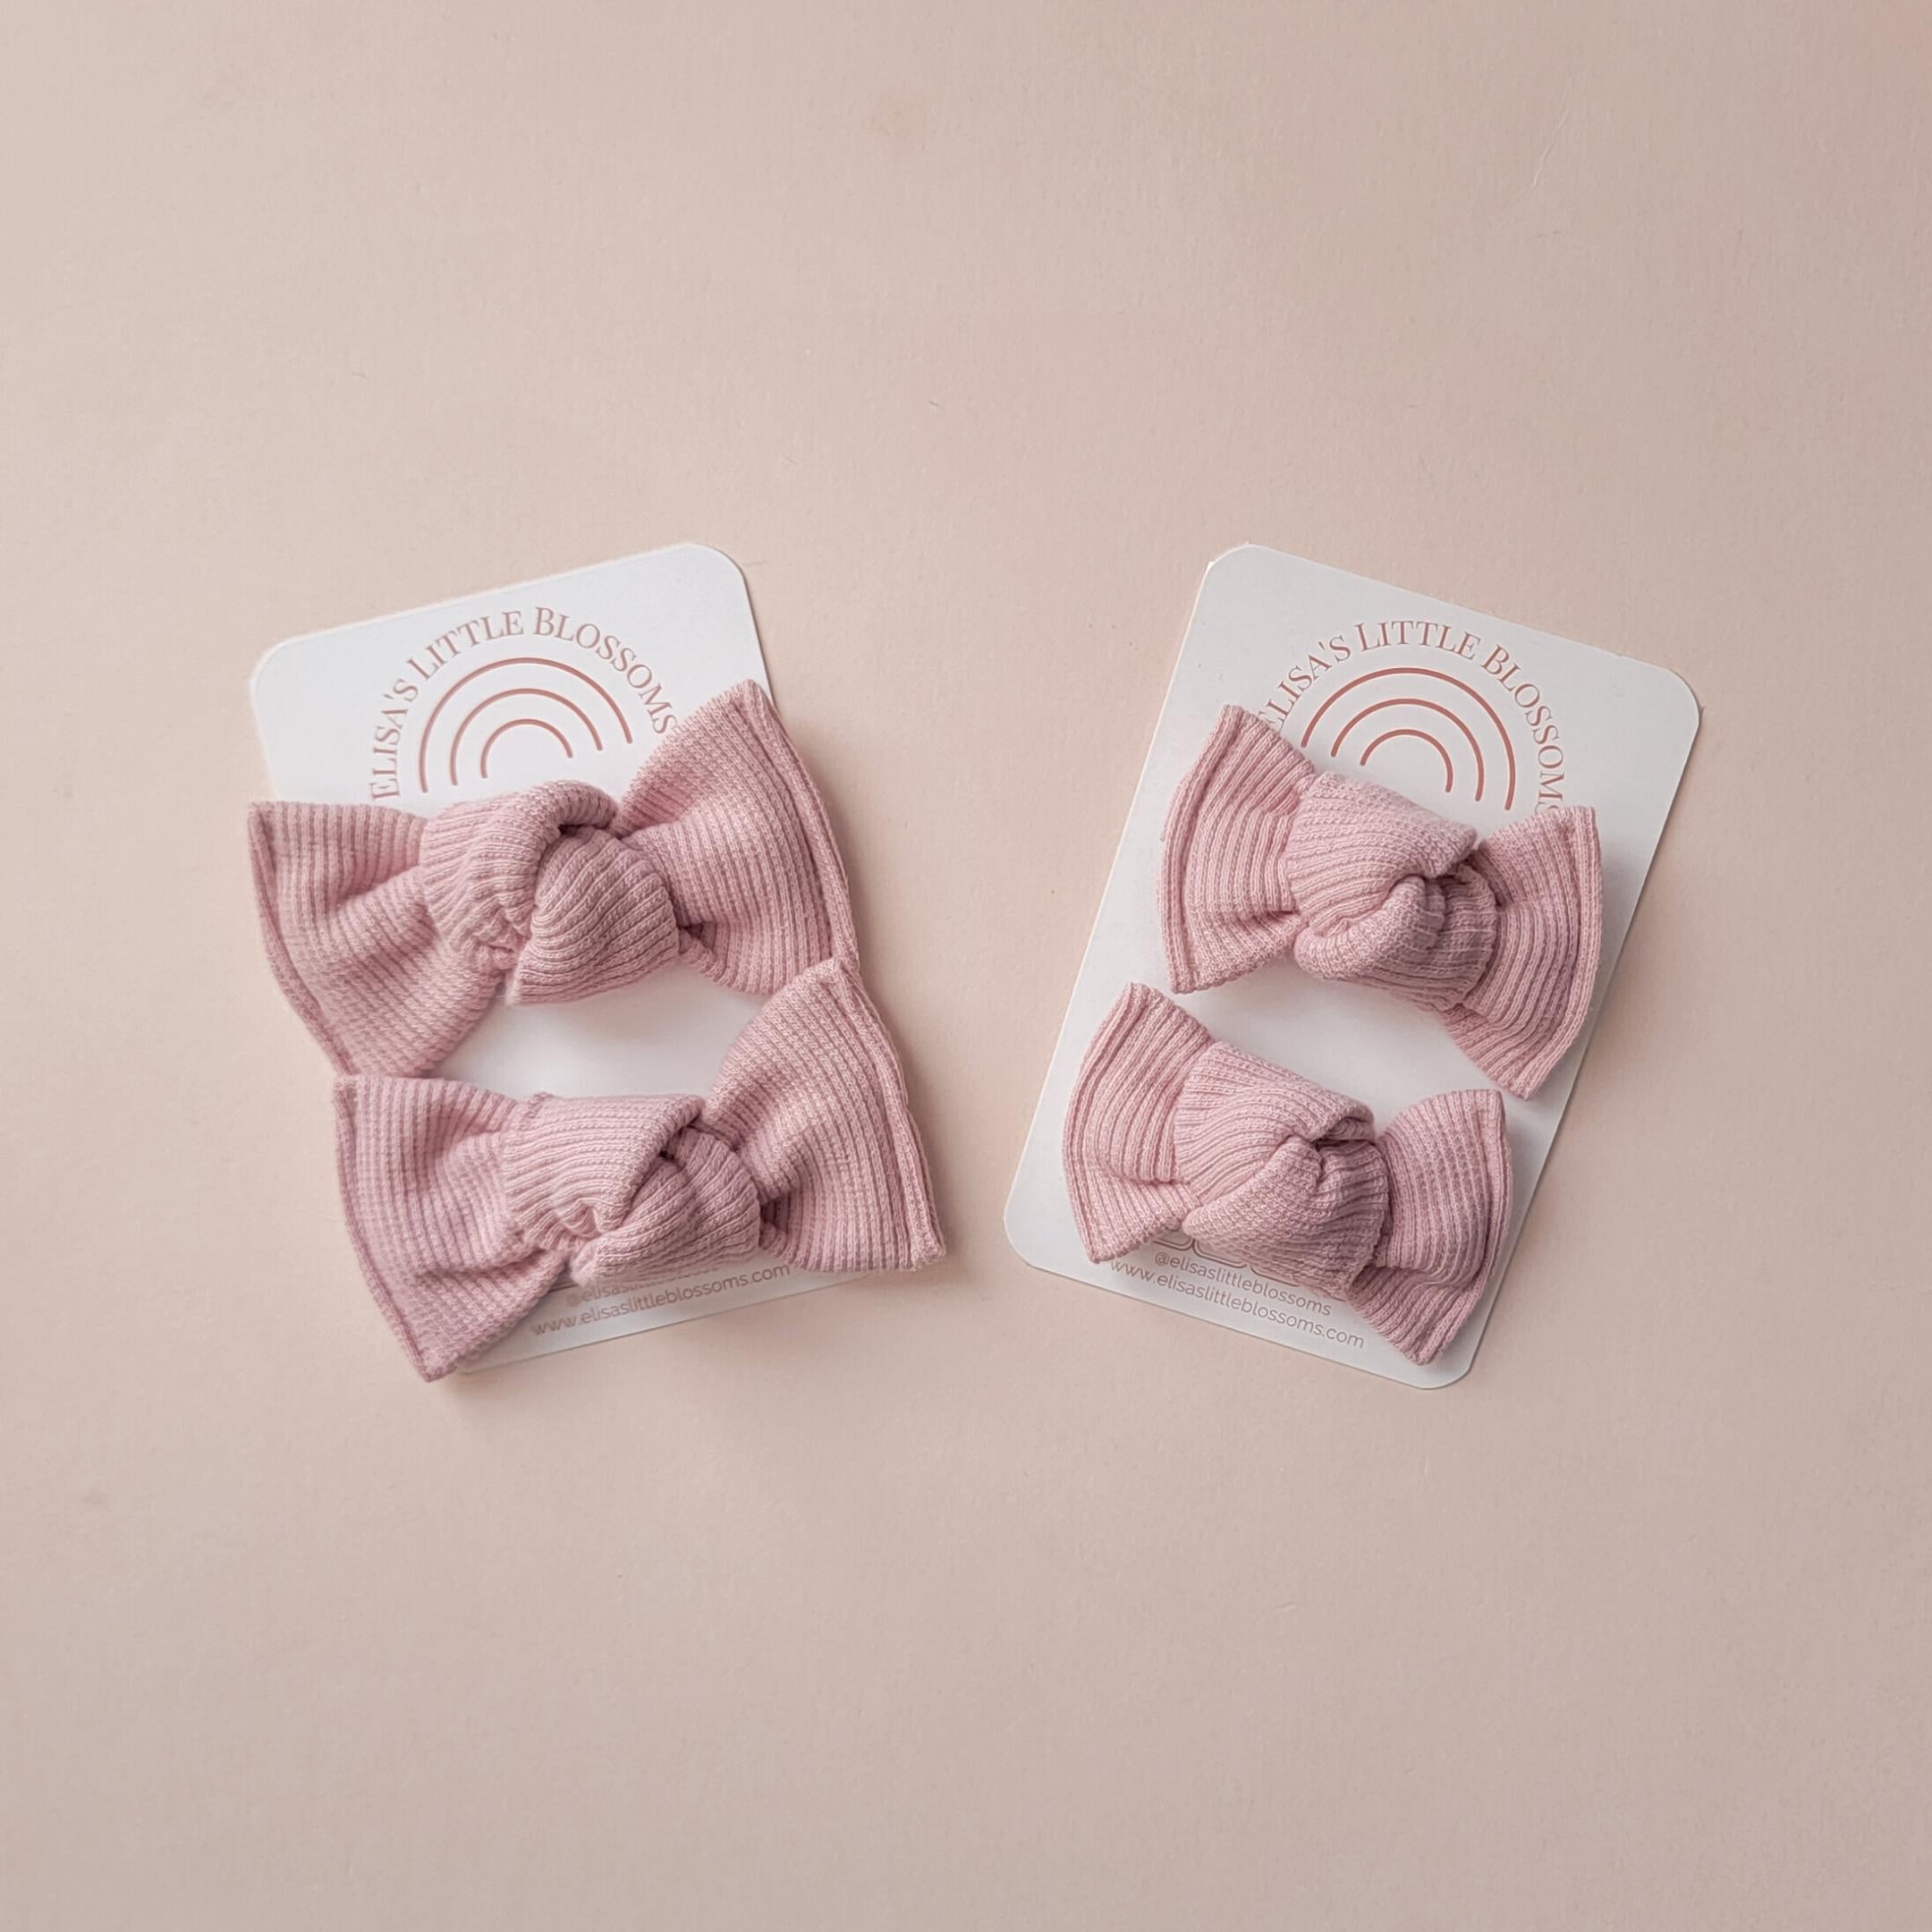 Knot Pigtail Set // Dusty Pink Ribbed Pigtails Pigtail Sets Elisa's Little Blossoms - Pigtail Sets 